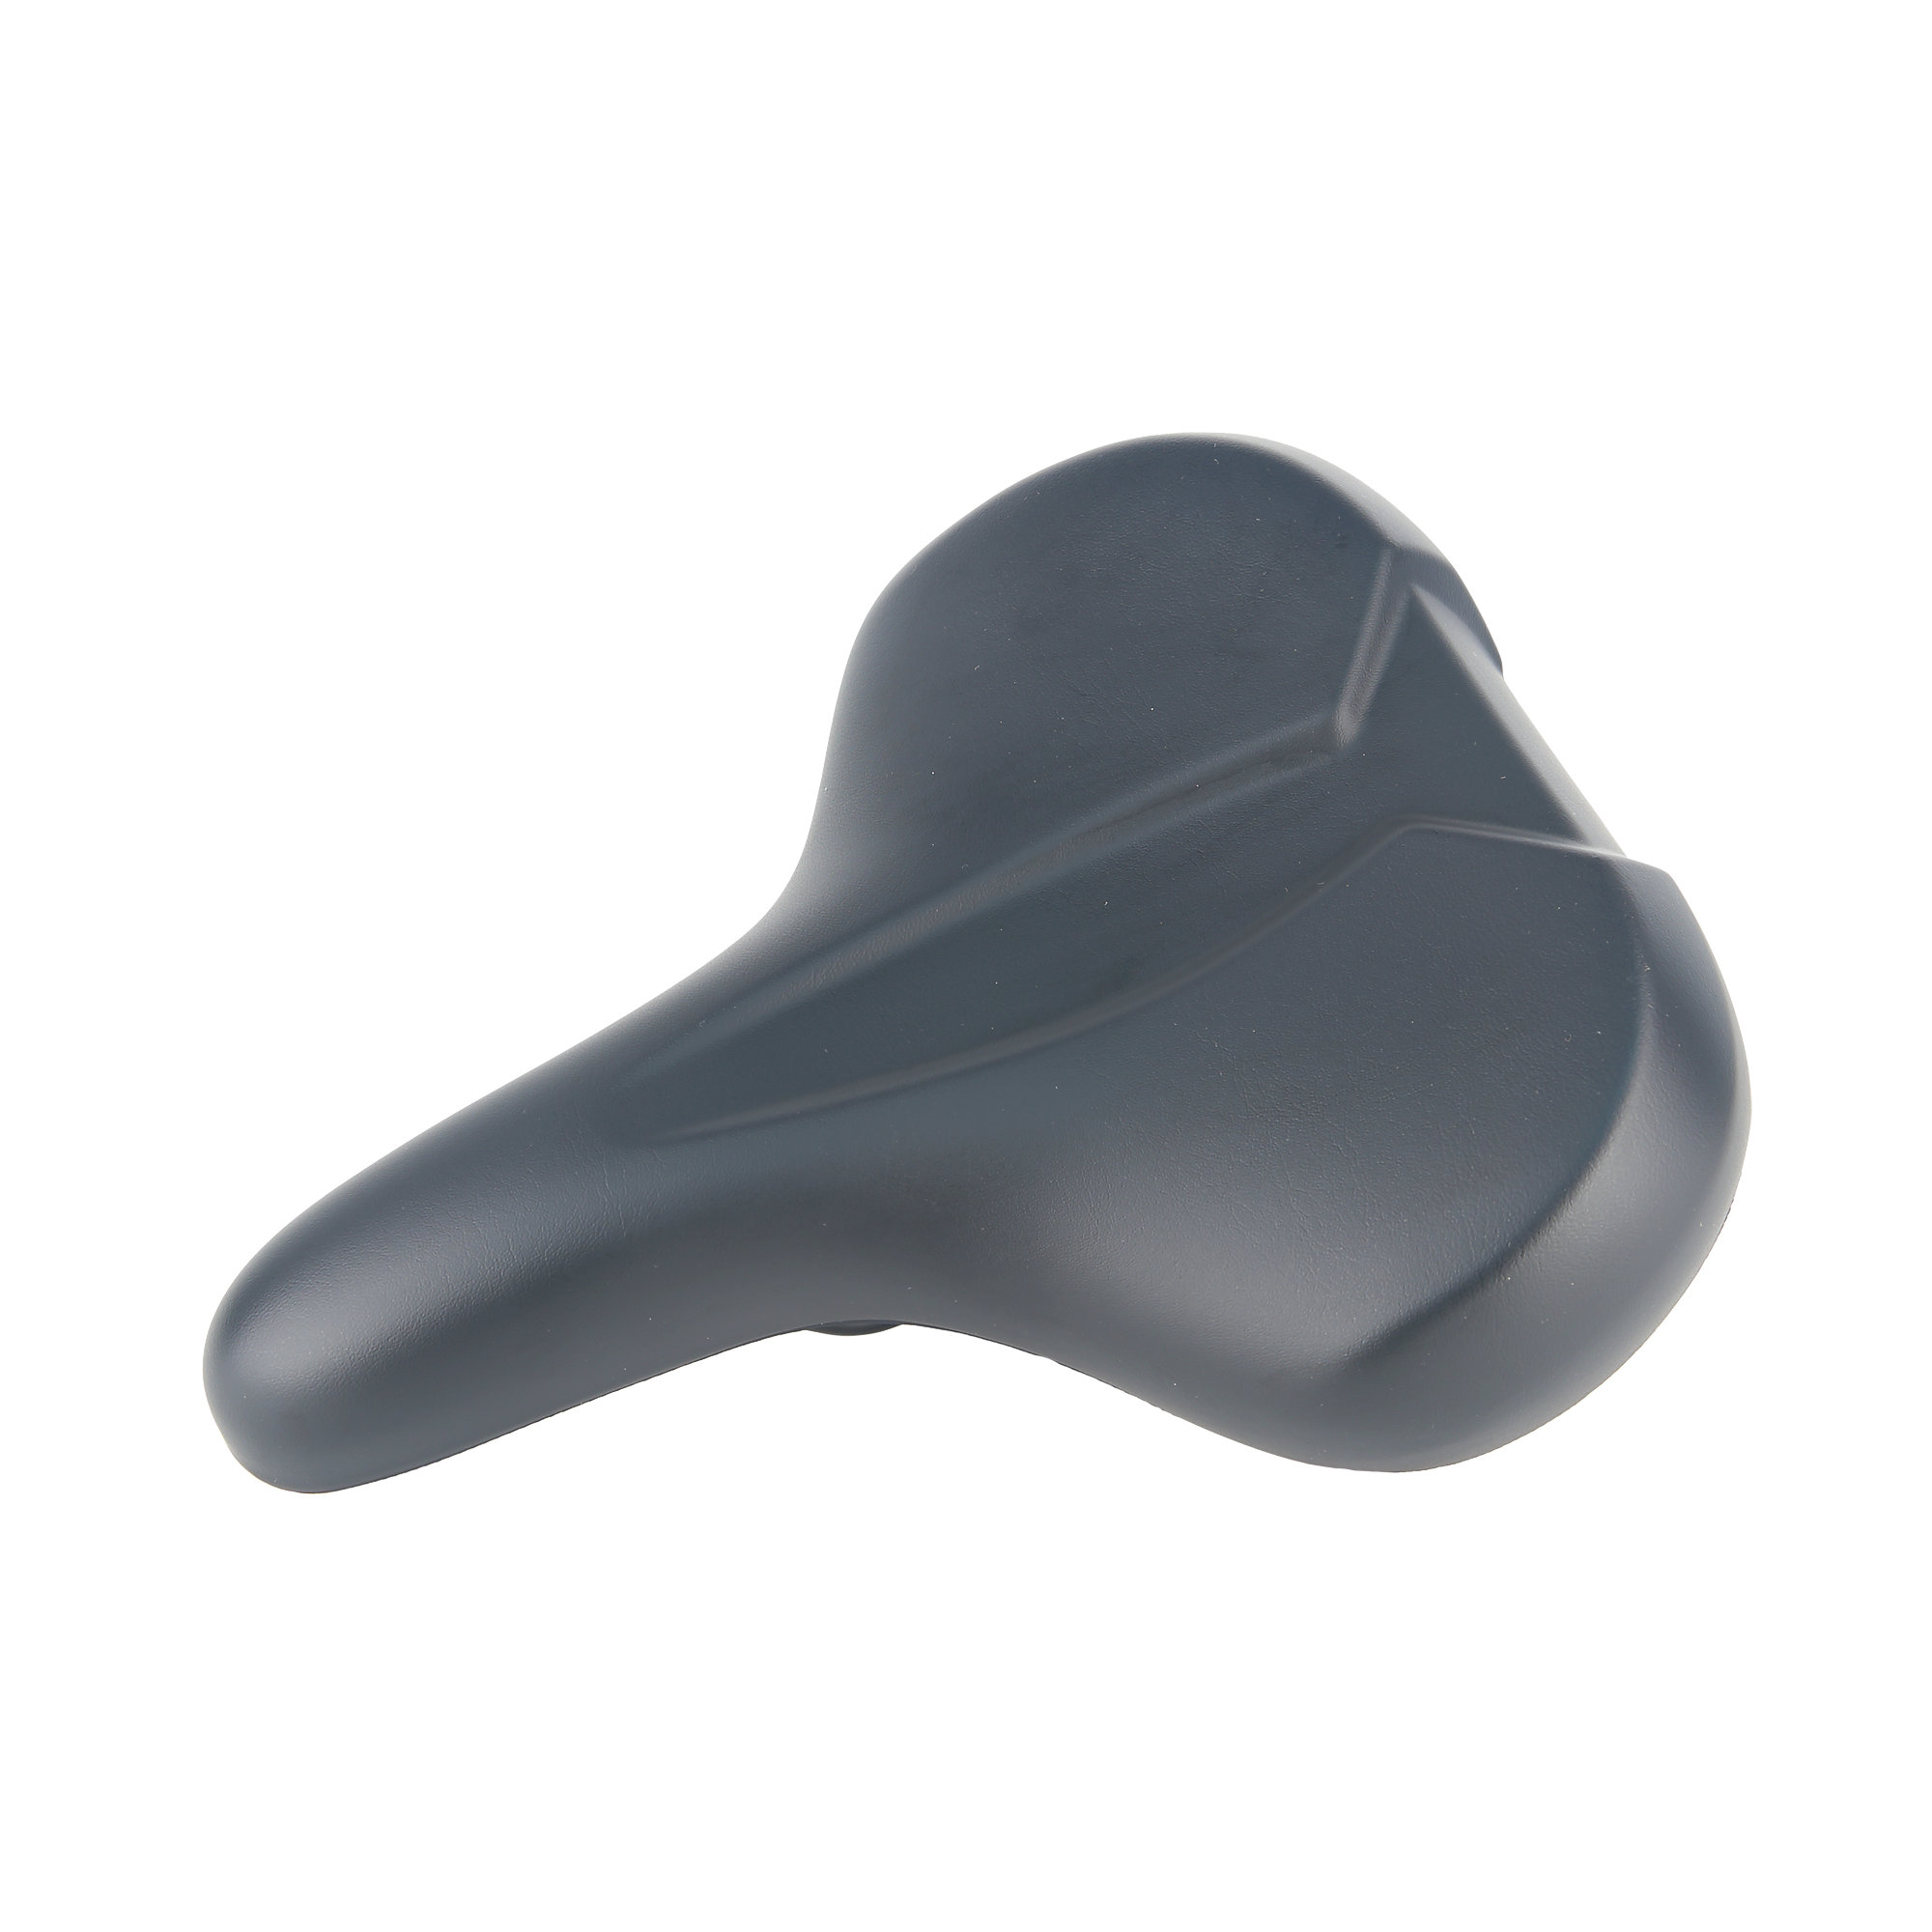 Velo Bike Seat 334167: Eco-Friendly Saddle for City & Indoor Cycling